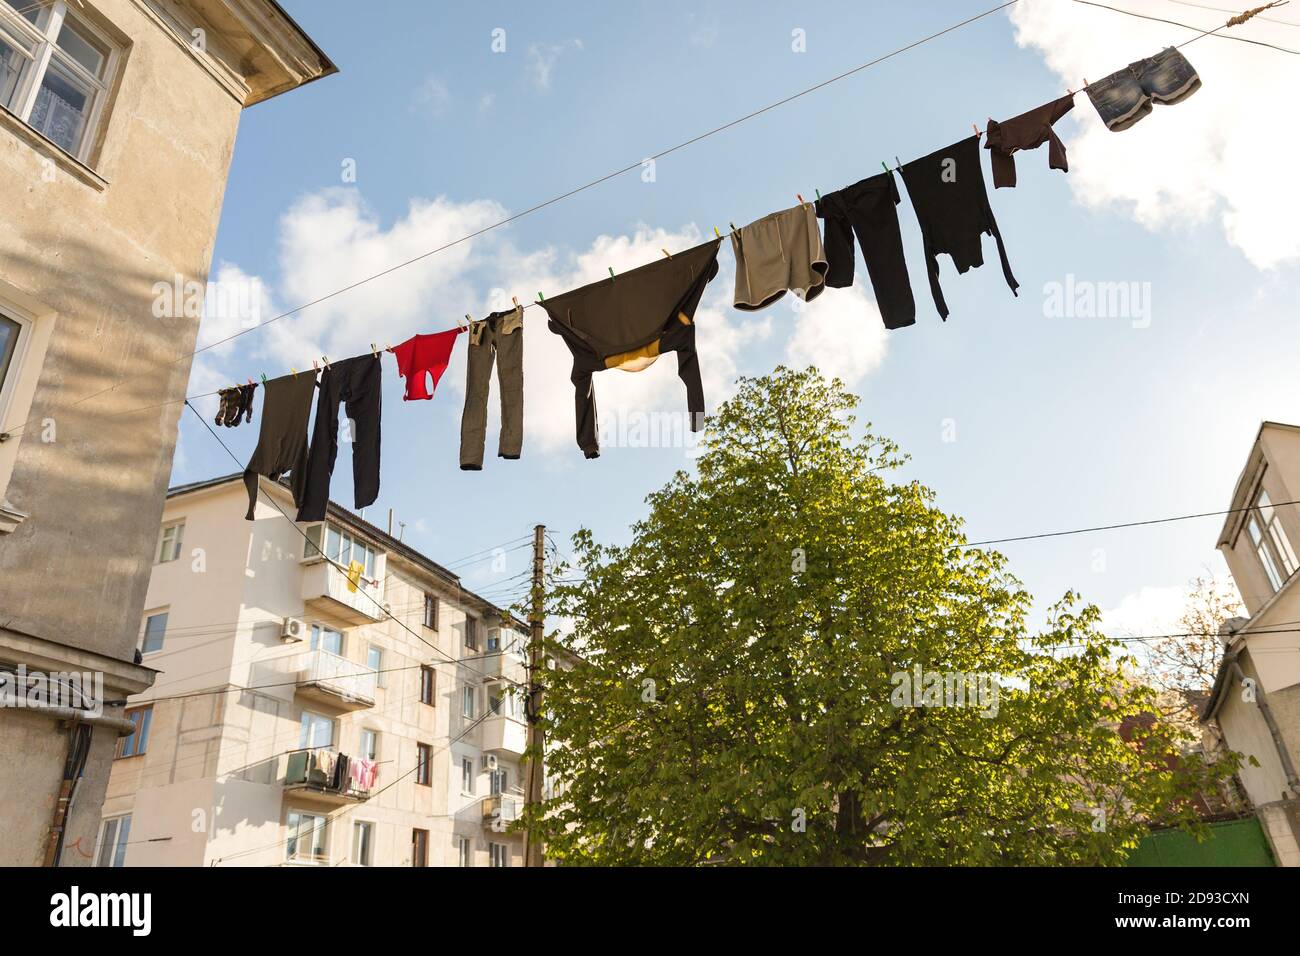 Pure linen is dried on the street. Clothes hanging to dry on the rope. Laundry hanging between houses Stock Photo